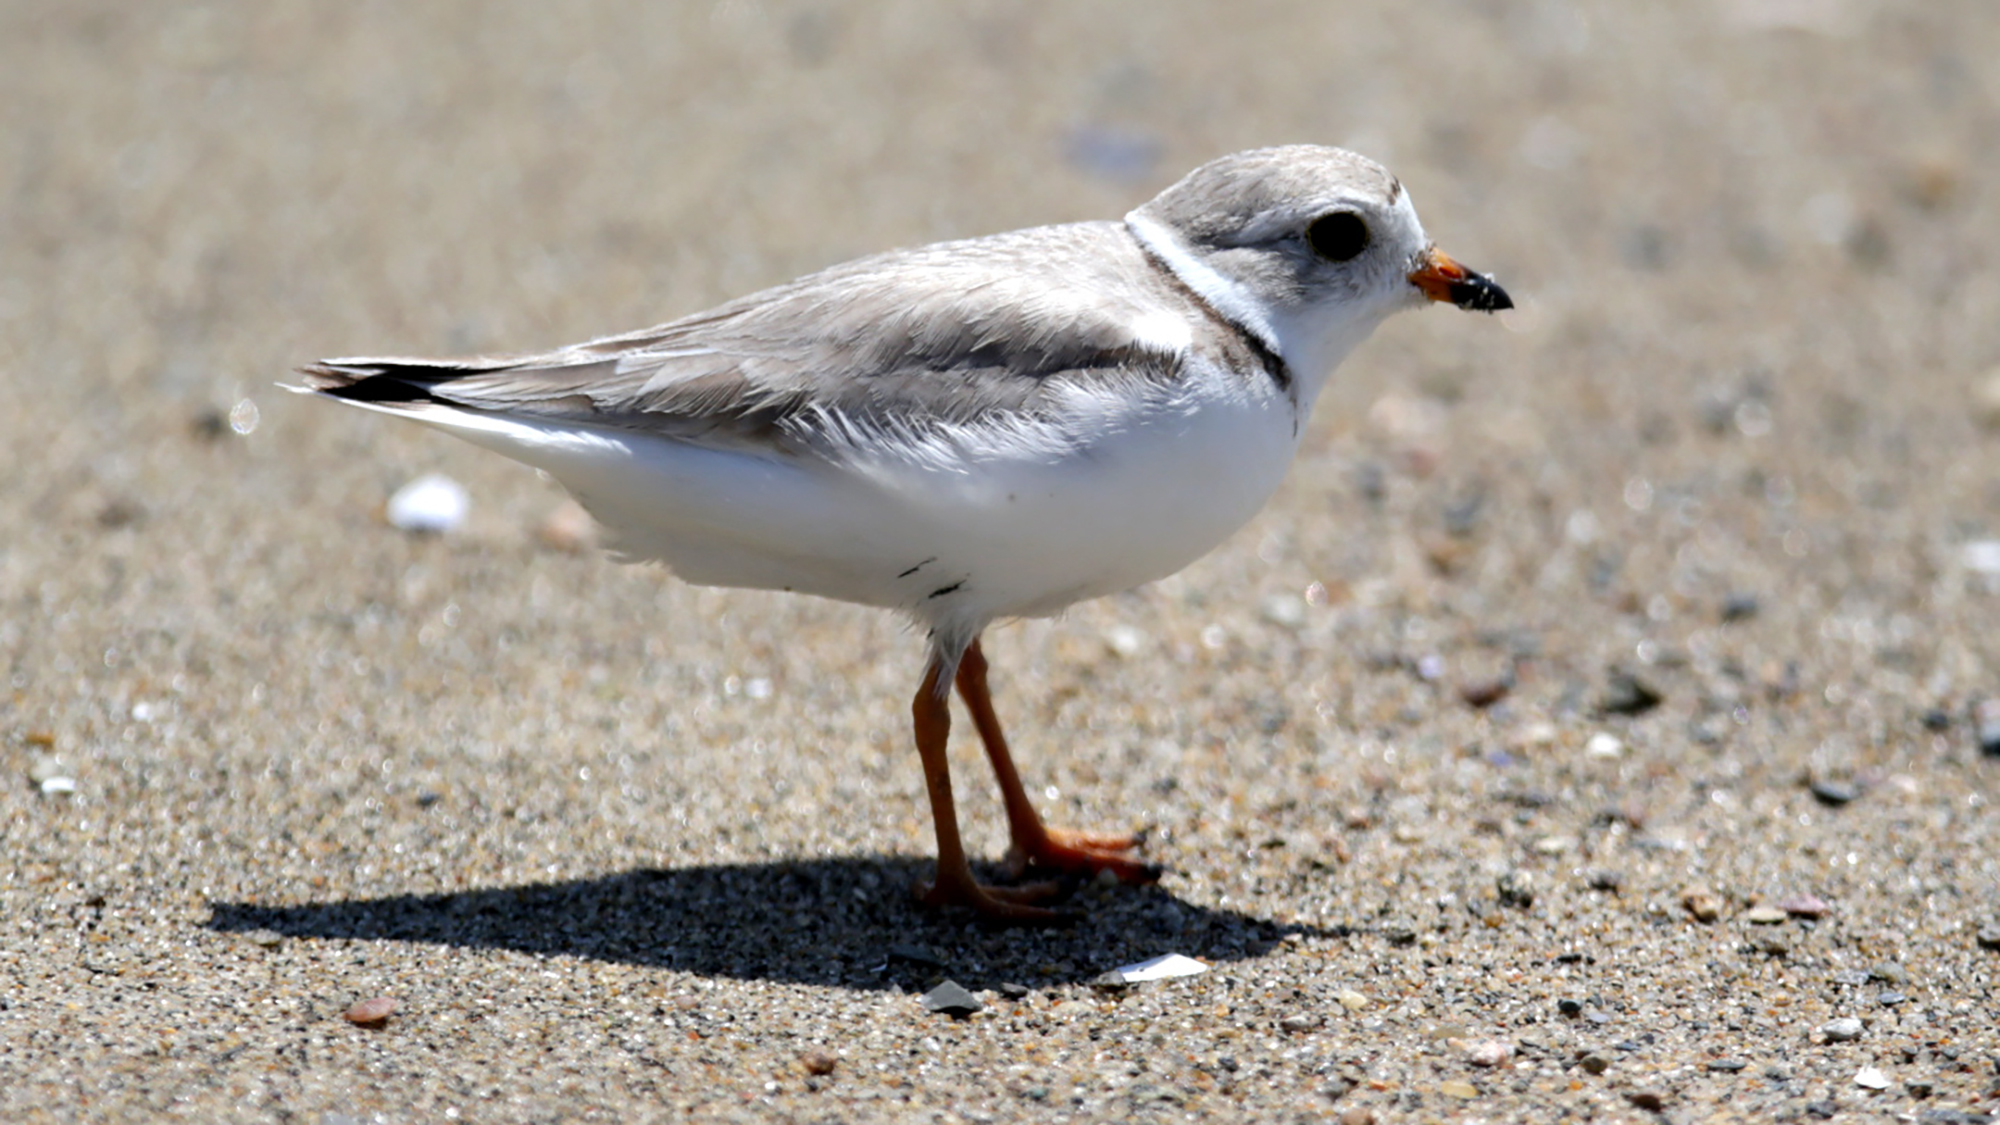 A piping plover walks along L Street Beach in South Boston. The bird is small, with white and grey plummage.